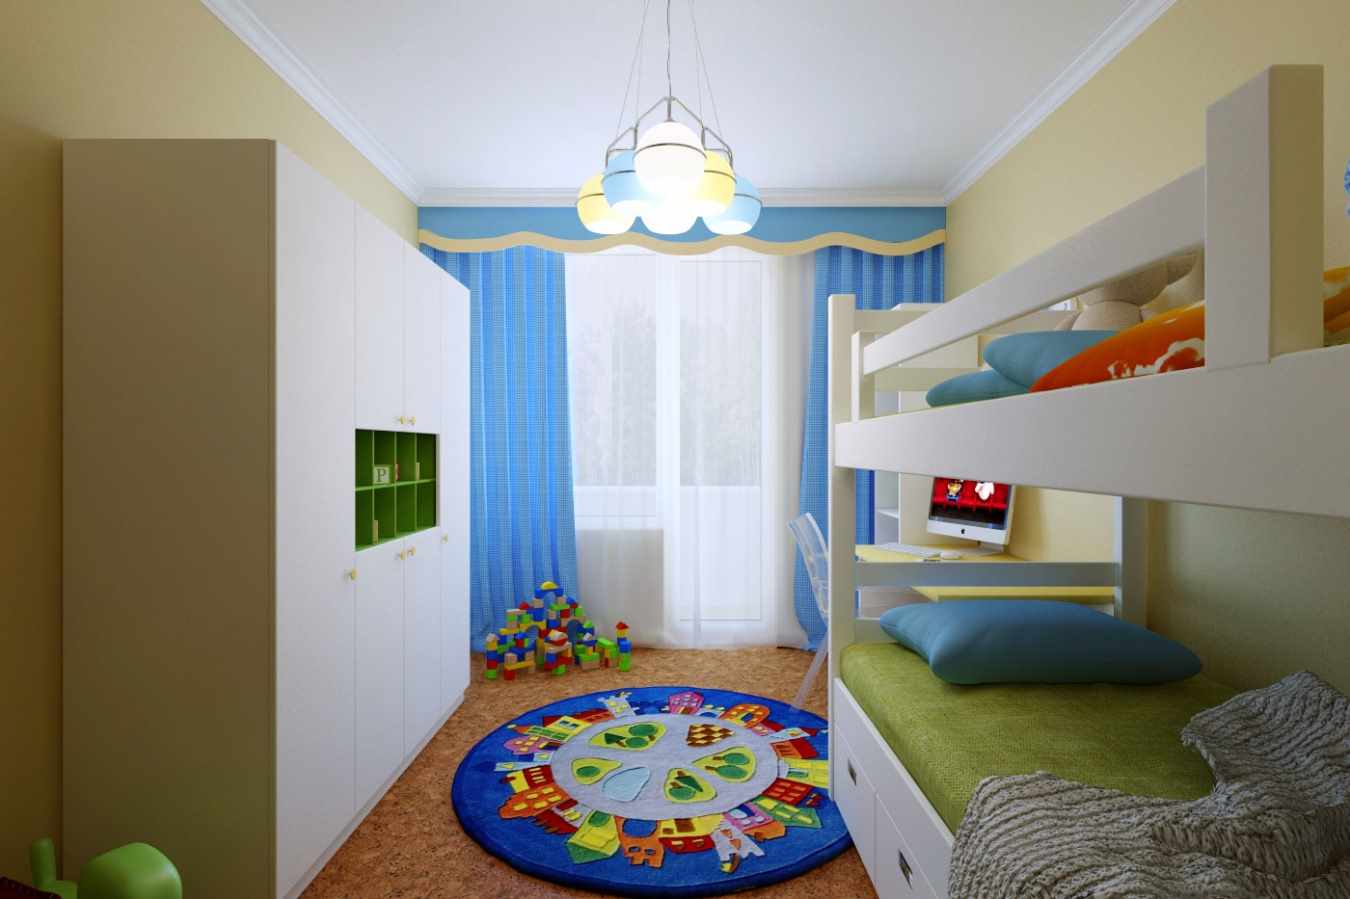 example of a bright style of a children's room